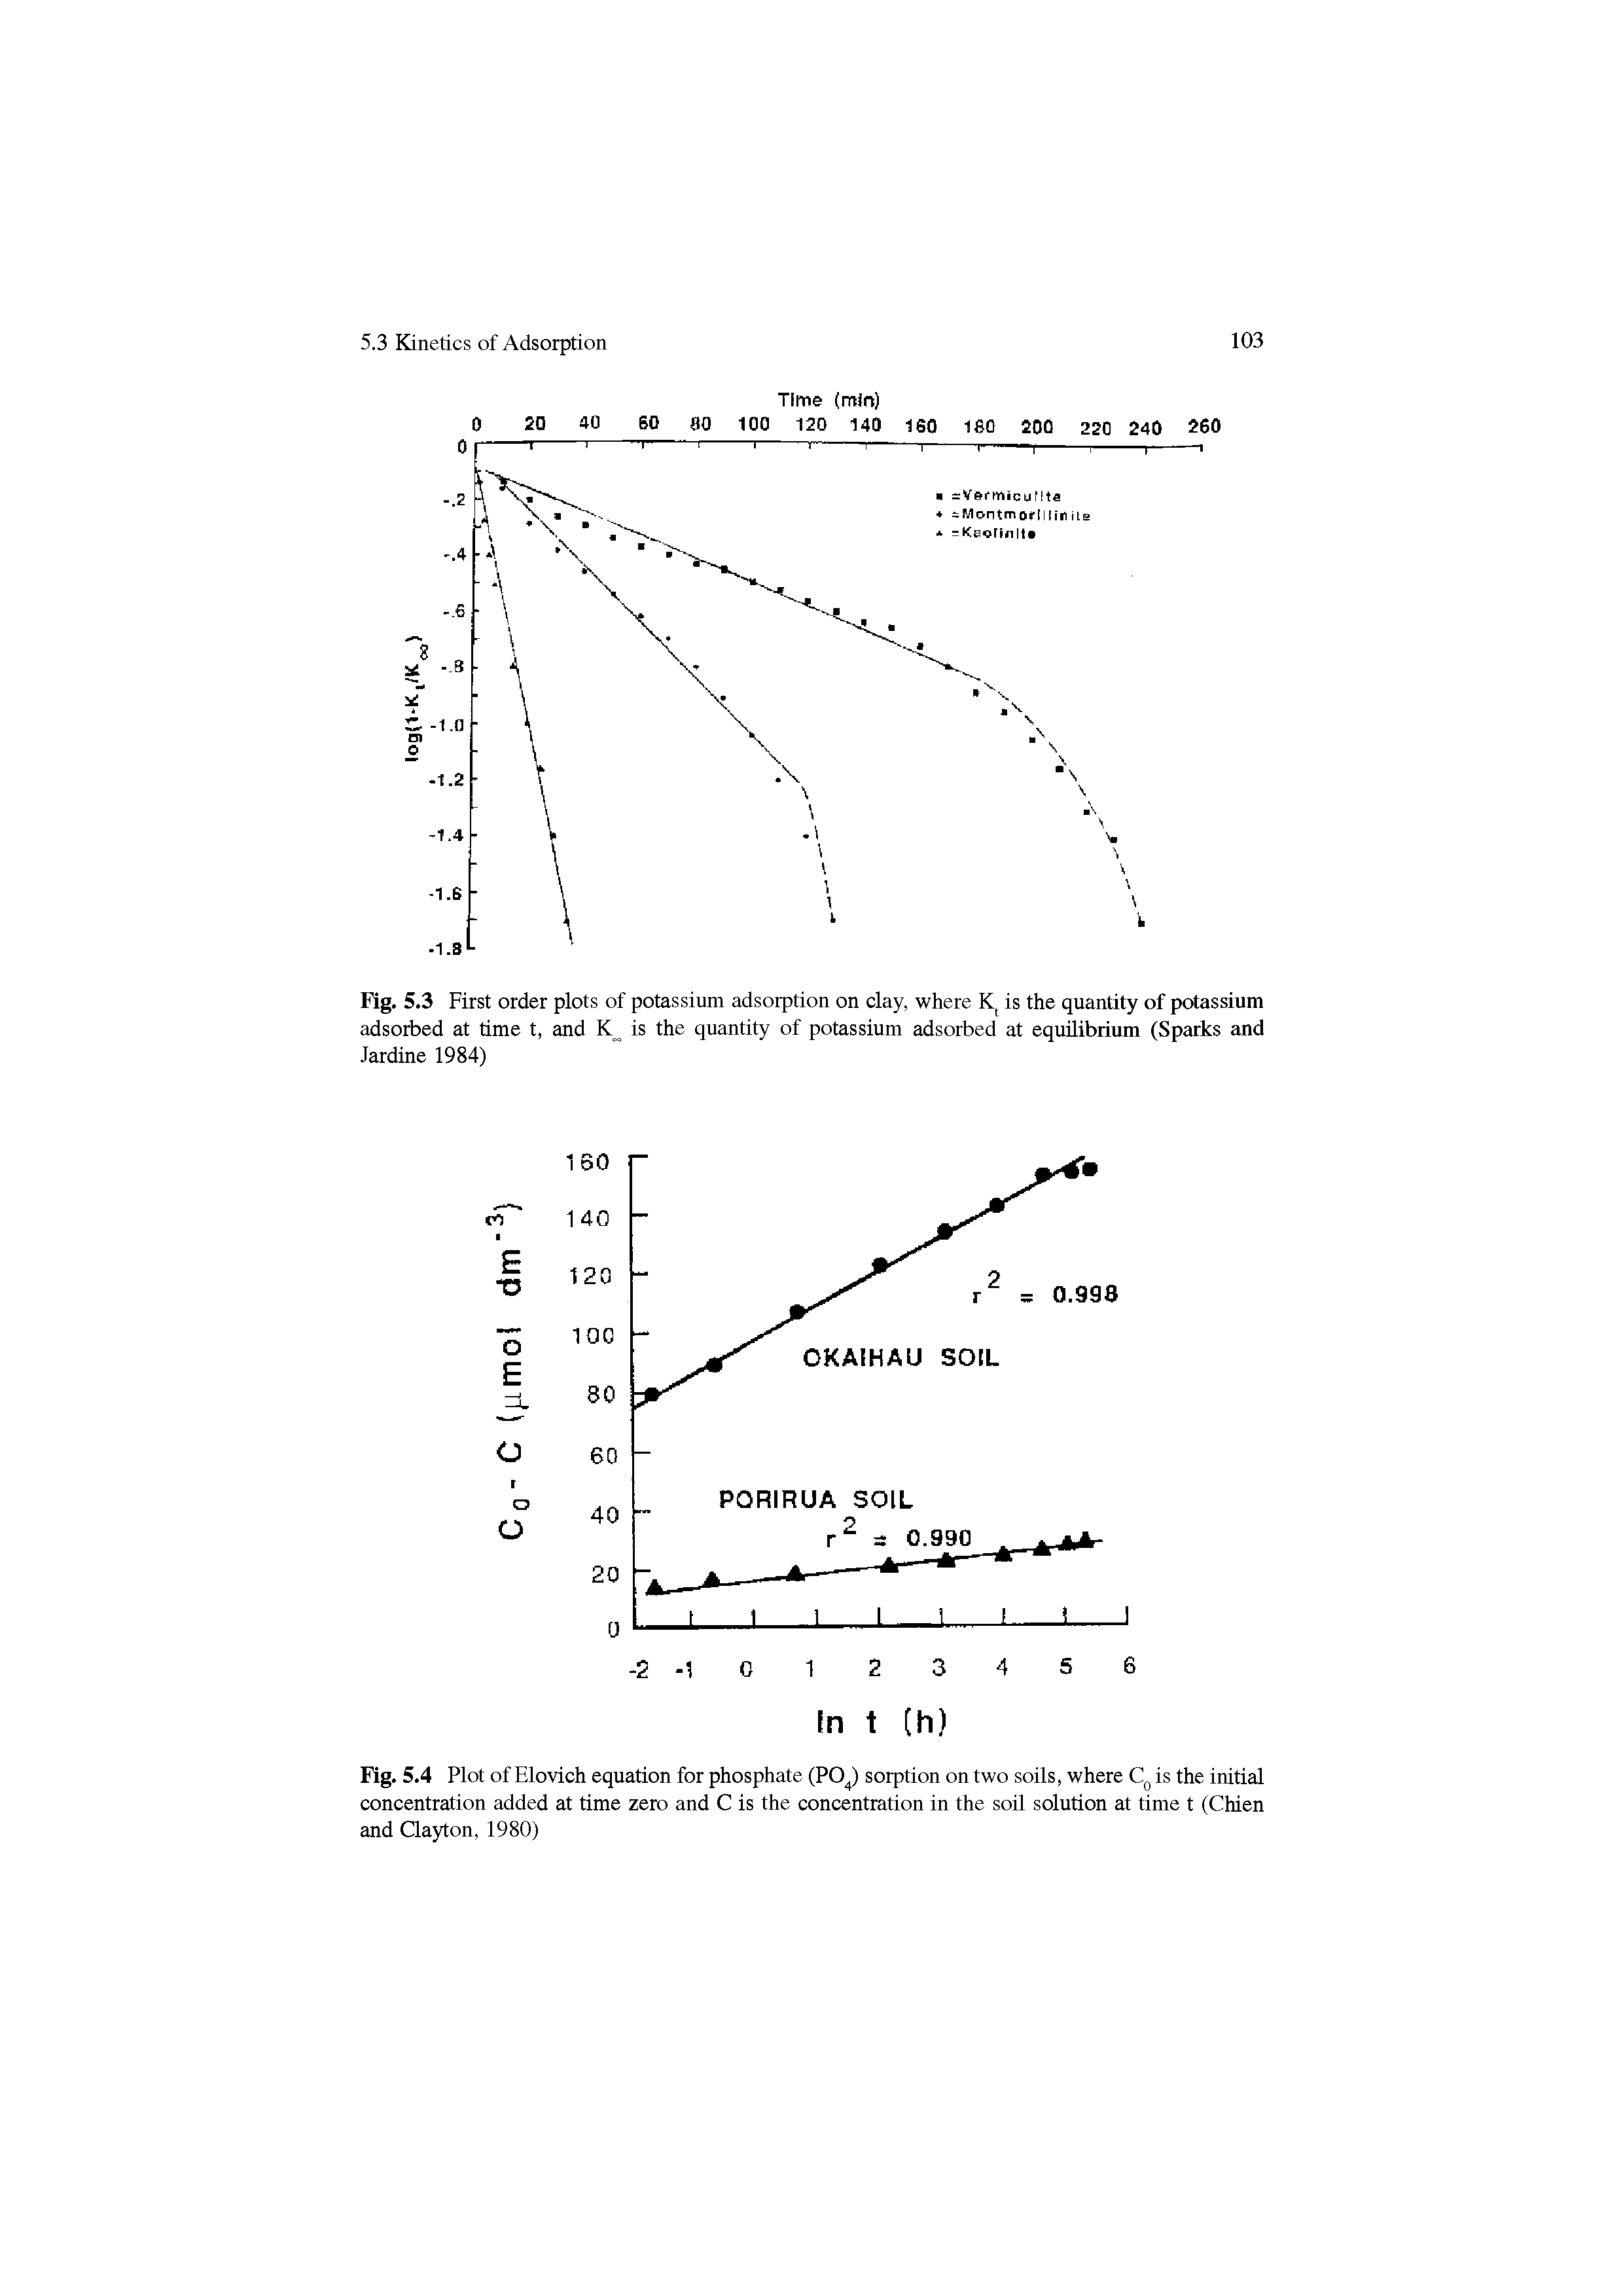 Fig. 5.4 Plot of Elovich equation for phosphate (PO ) sorption on two soils, where is the initial concentration added at time zero and C is the concentration in the soil solution at time t (Chien and Clayton, 1980)...